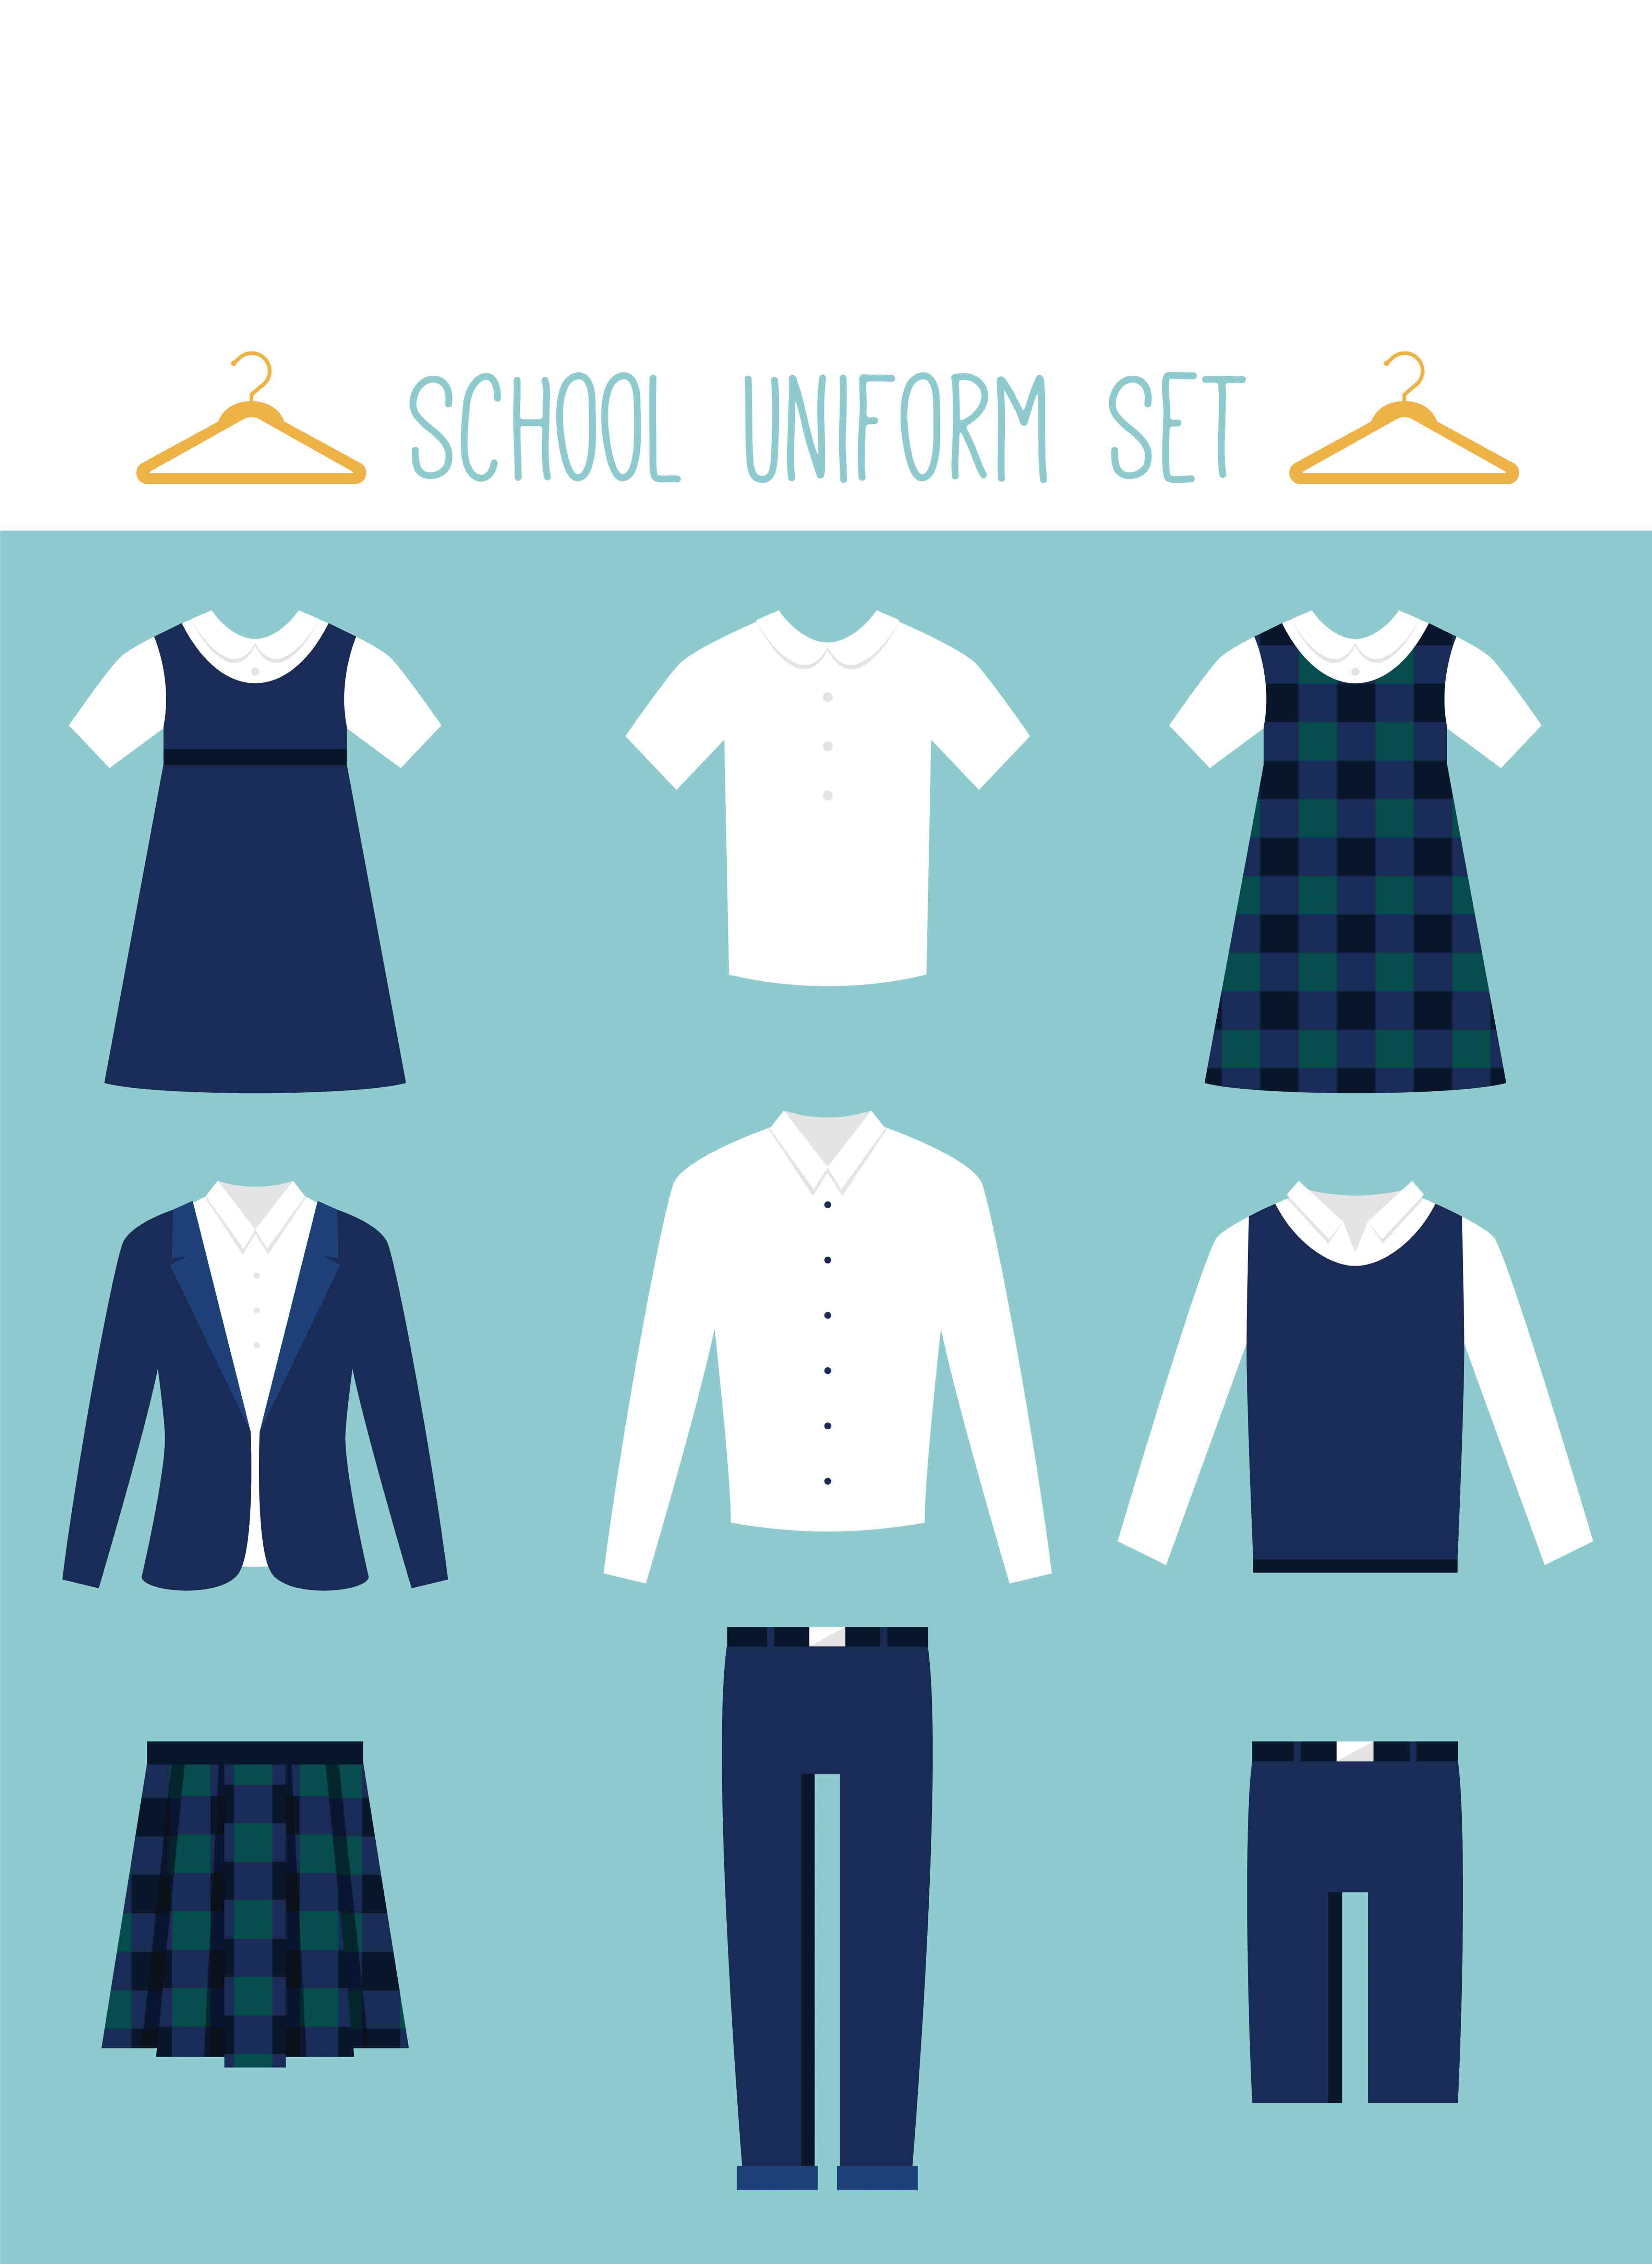 School Uniforms Might Get in the Way of Kids Exercising